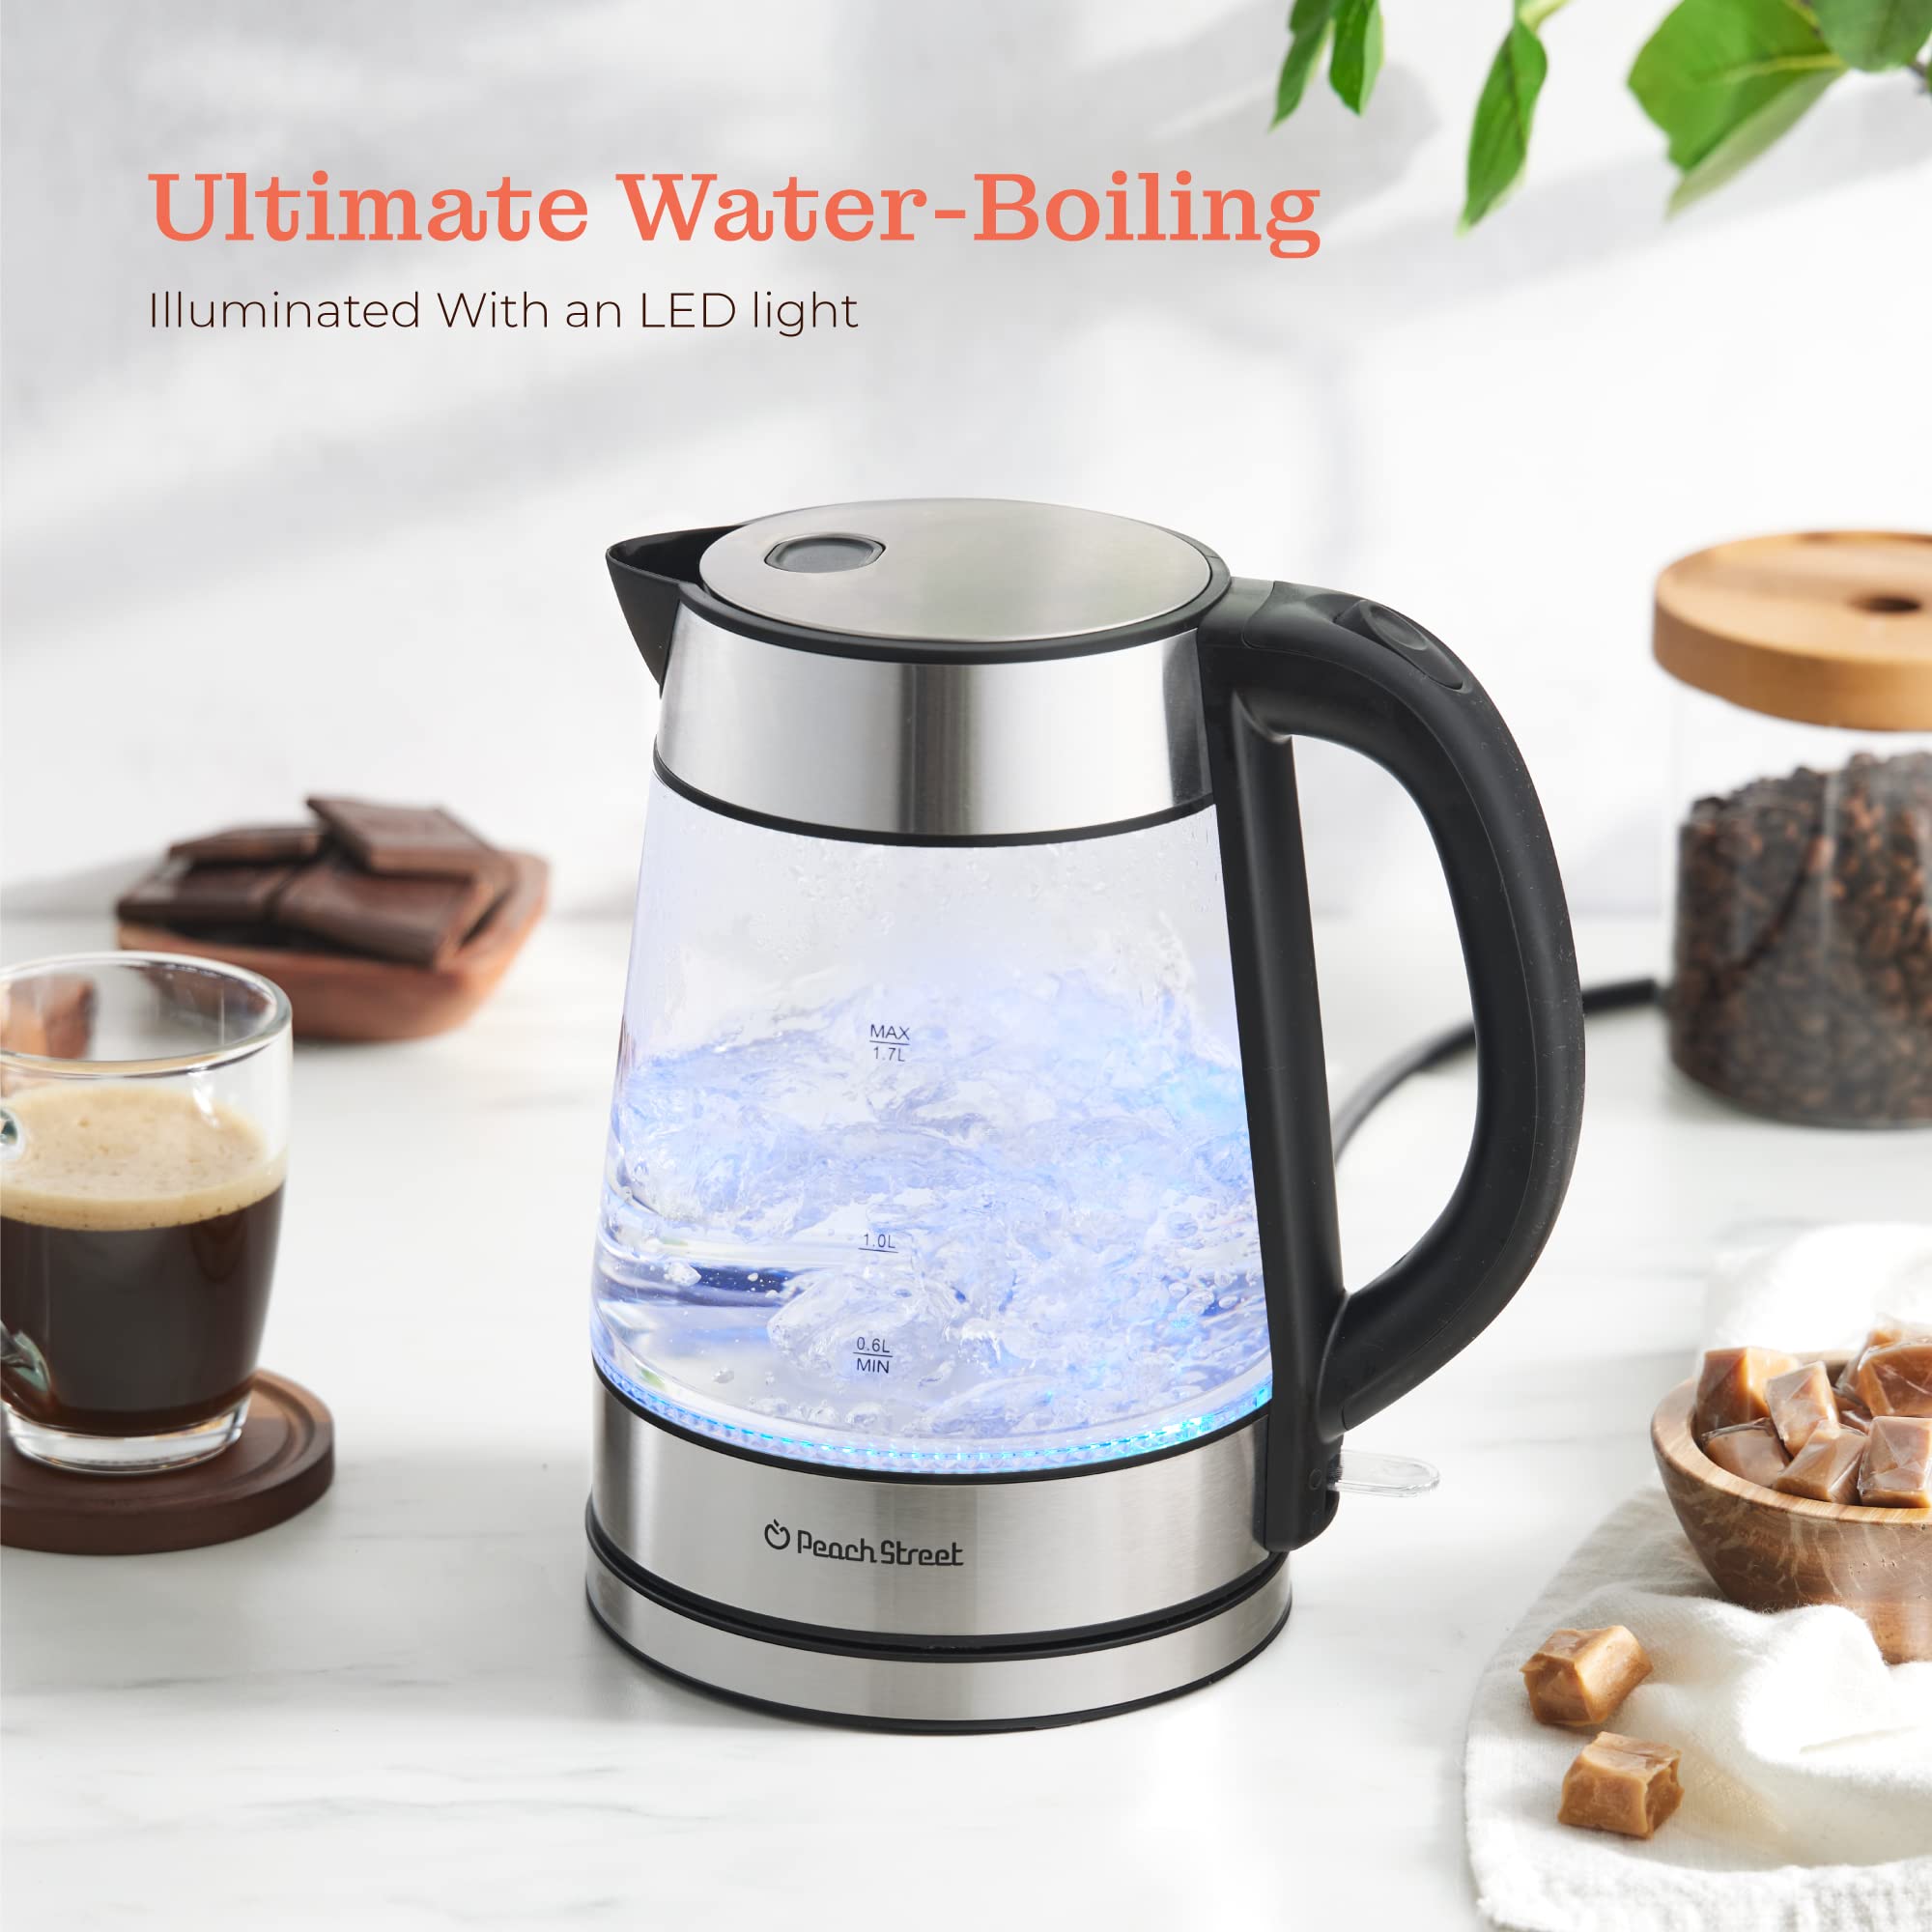 Speed-Boil Electric Kettle - 1.7L Water Boiler 1500W, Coffee & Tea Kettle Borosilicate Glass, Easy Clean Wide Opening, Auto Shut-Off, Cool Touch Handle, LED Light. 360° Rotation, Boil Dry Protection